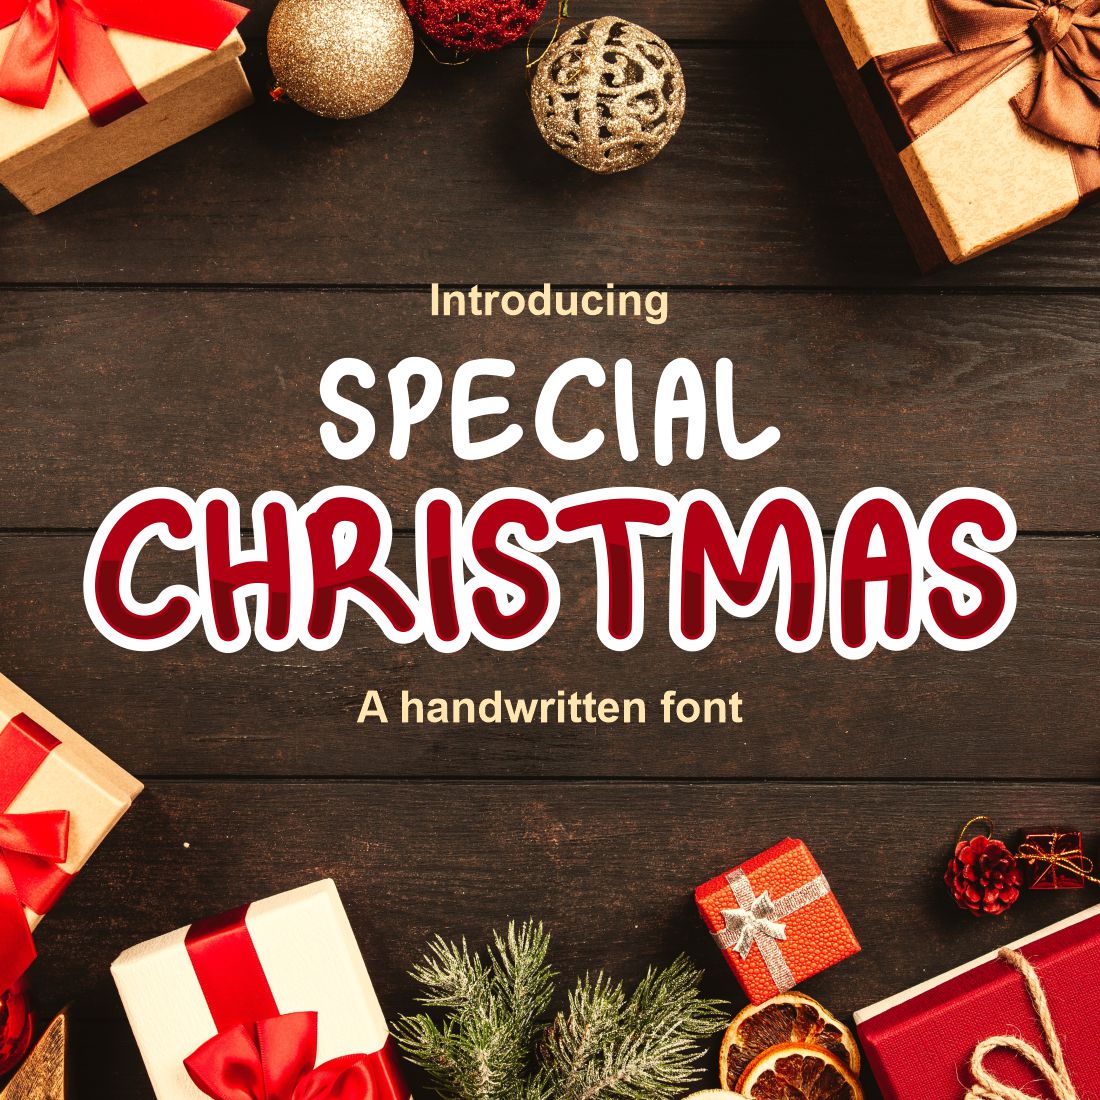 Spesial Christmas Font cover image.